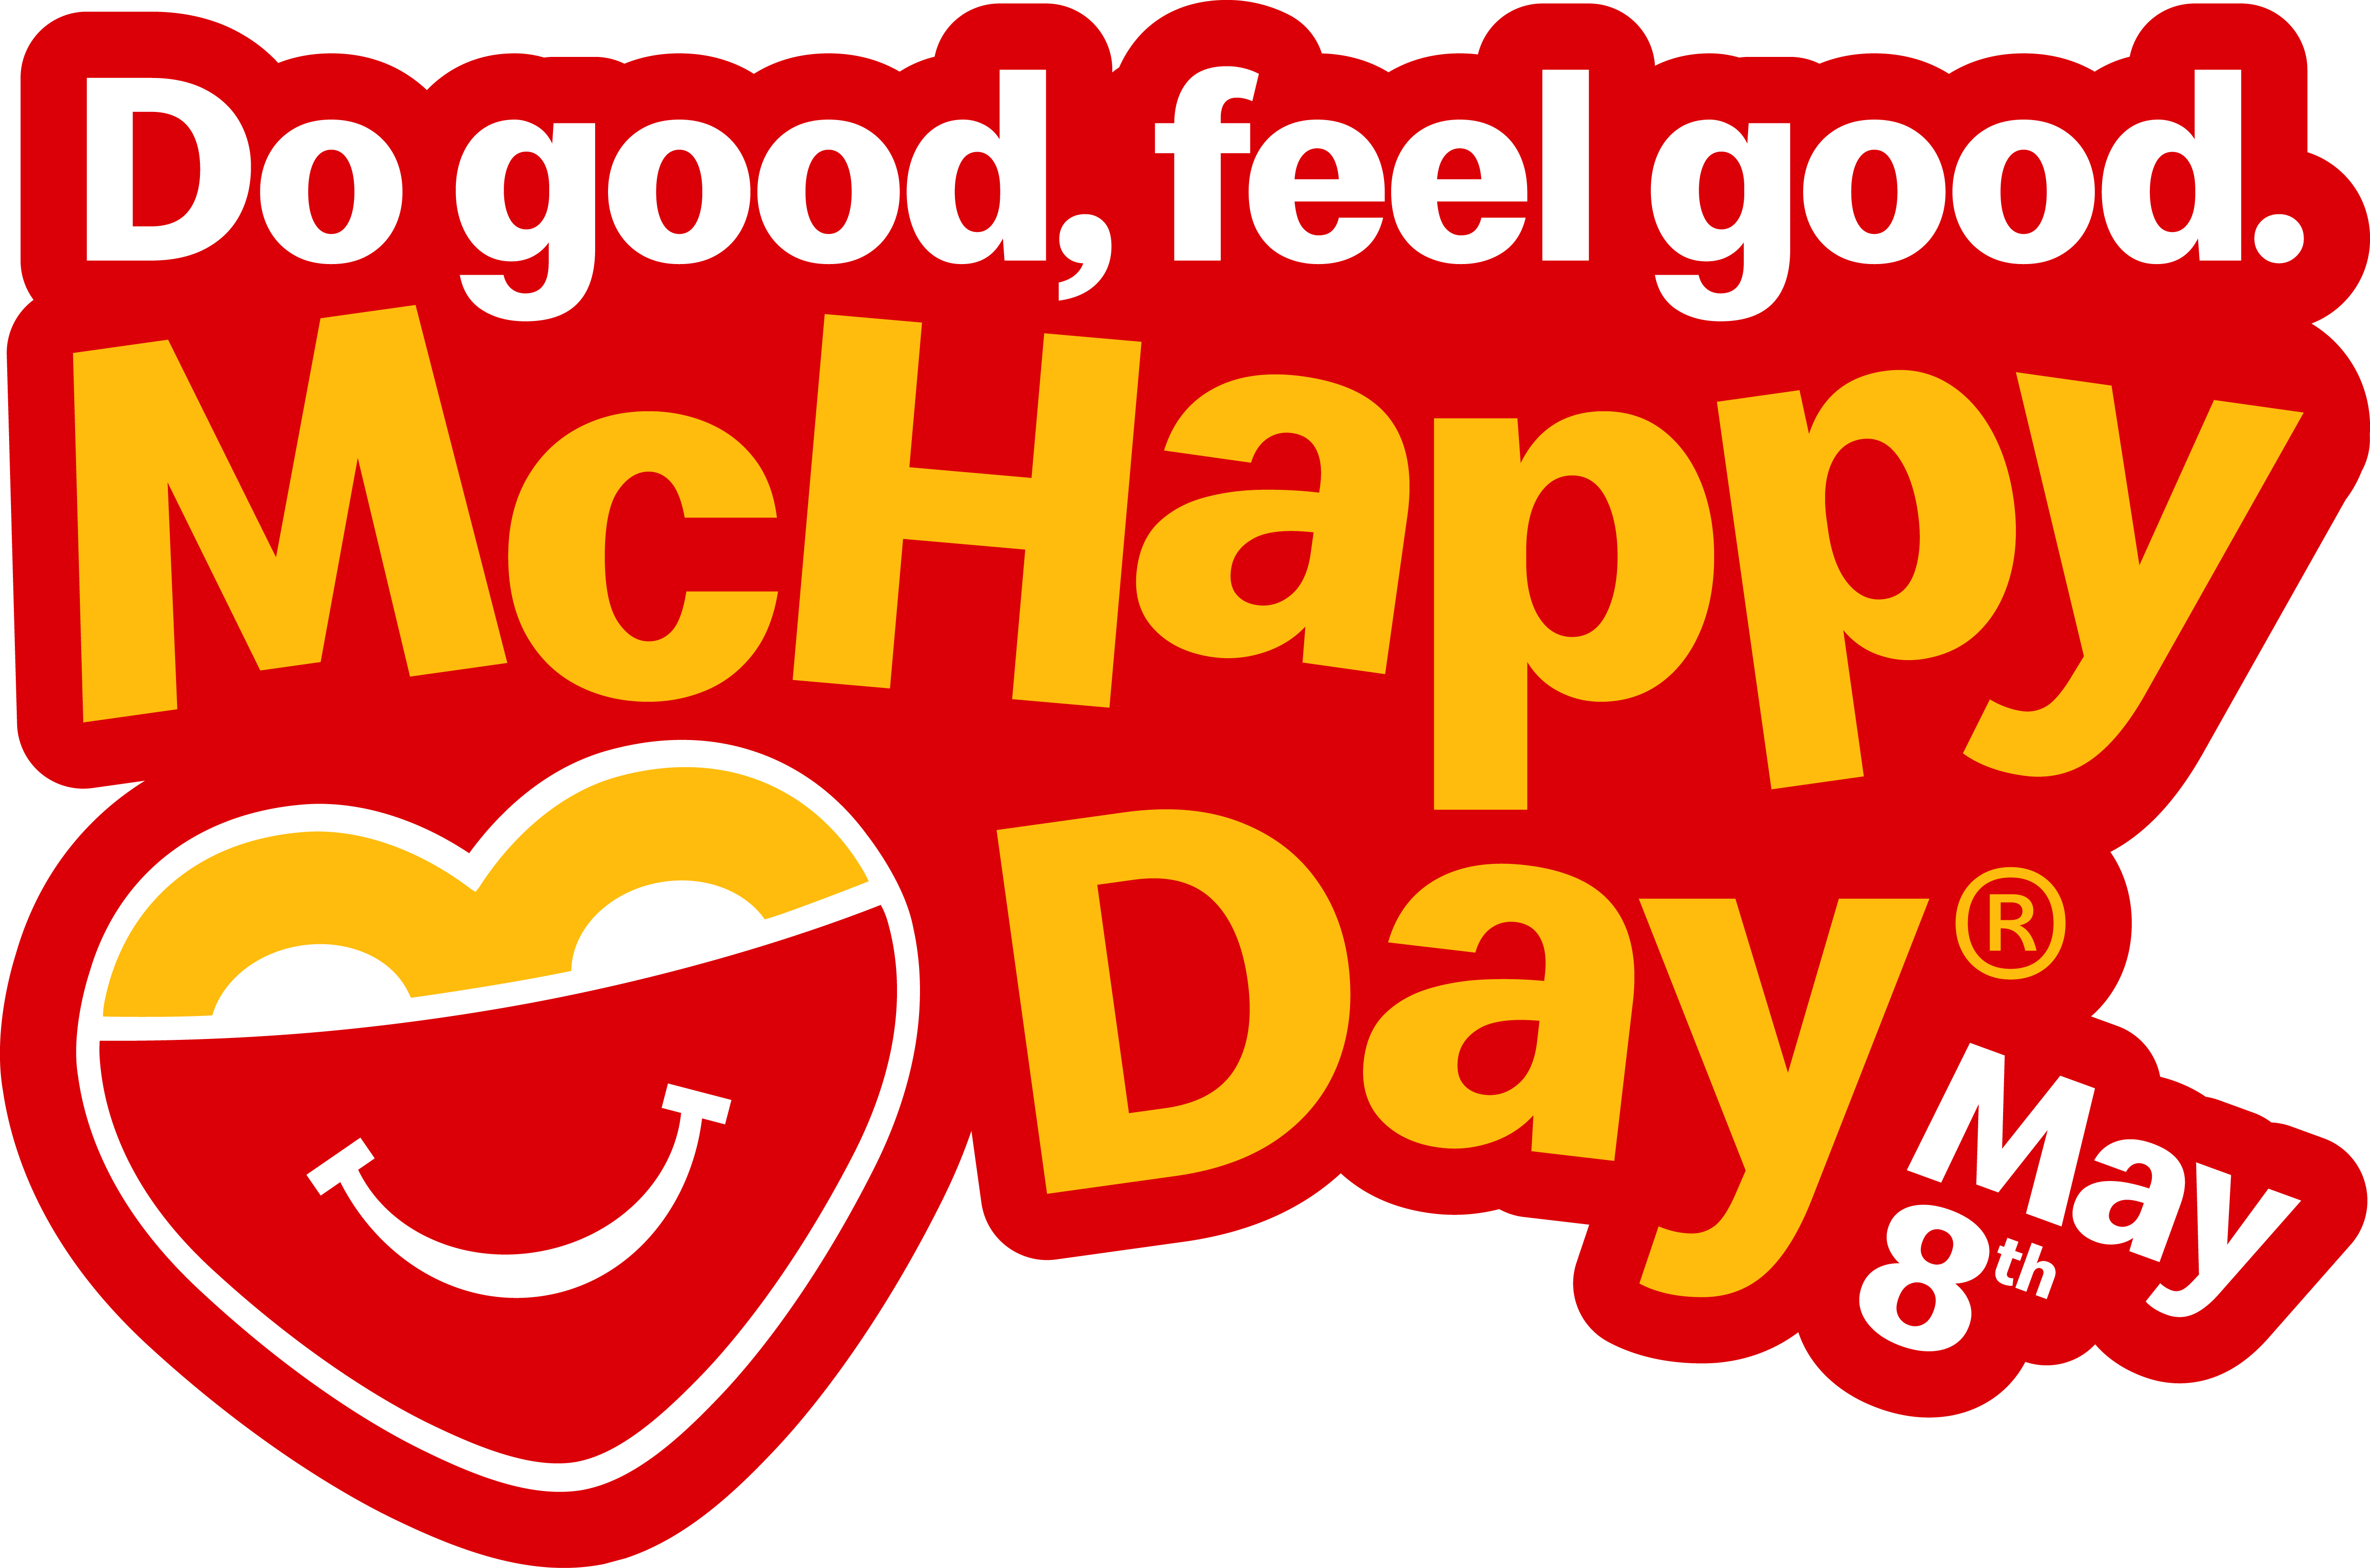 May 8th is McHappy Day at McDonalds!